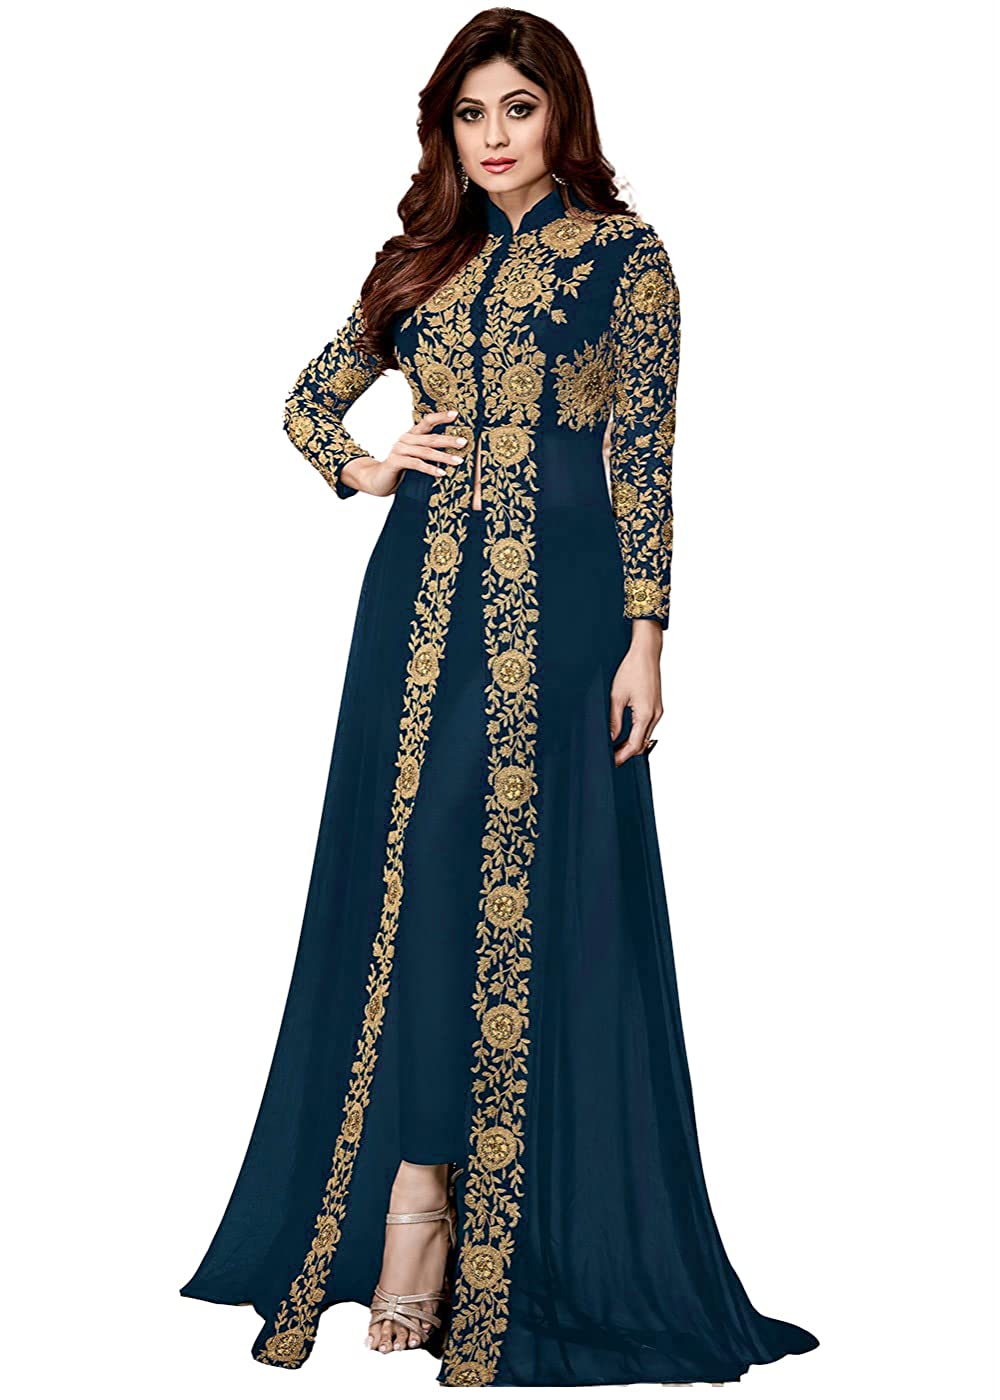 Florely Women's Embroidered Georgette Semi-Stiched Anarkali Gown with Dupatta -  DRESSES in Sri Lanka from Arcade Online Shopping - Just Rs. 7199!